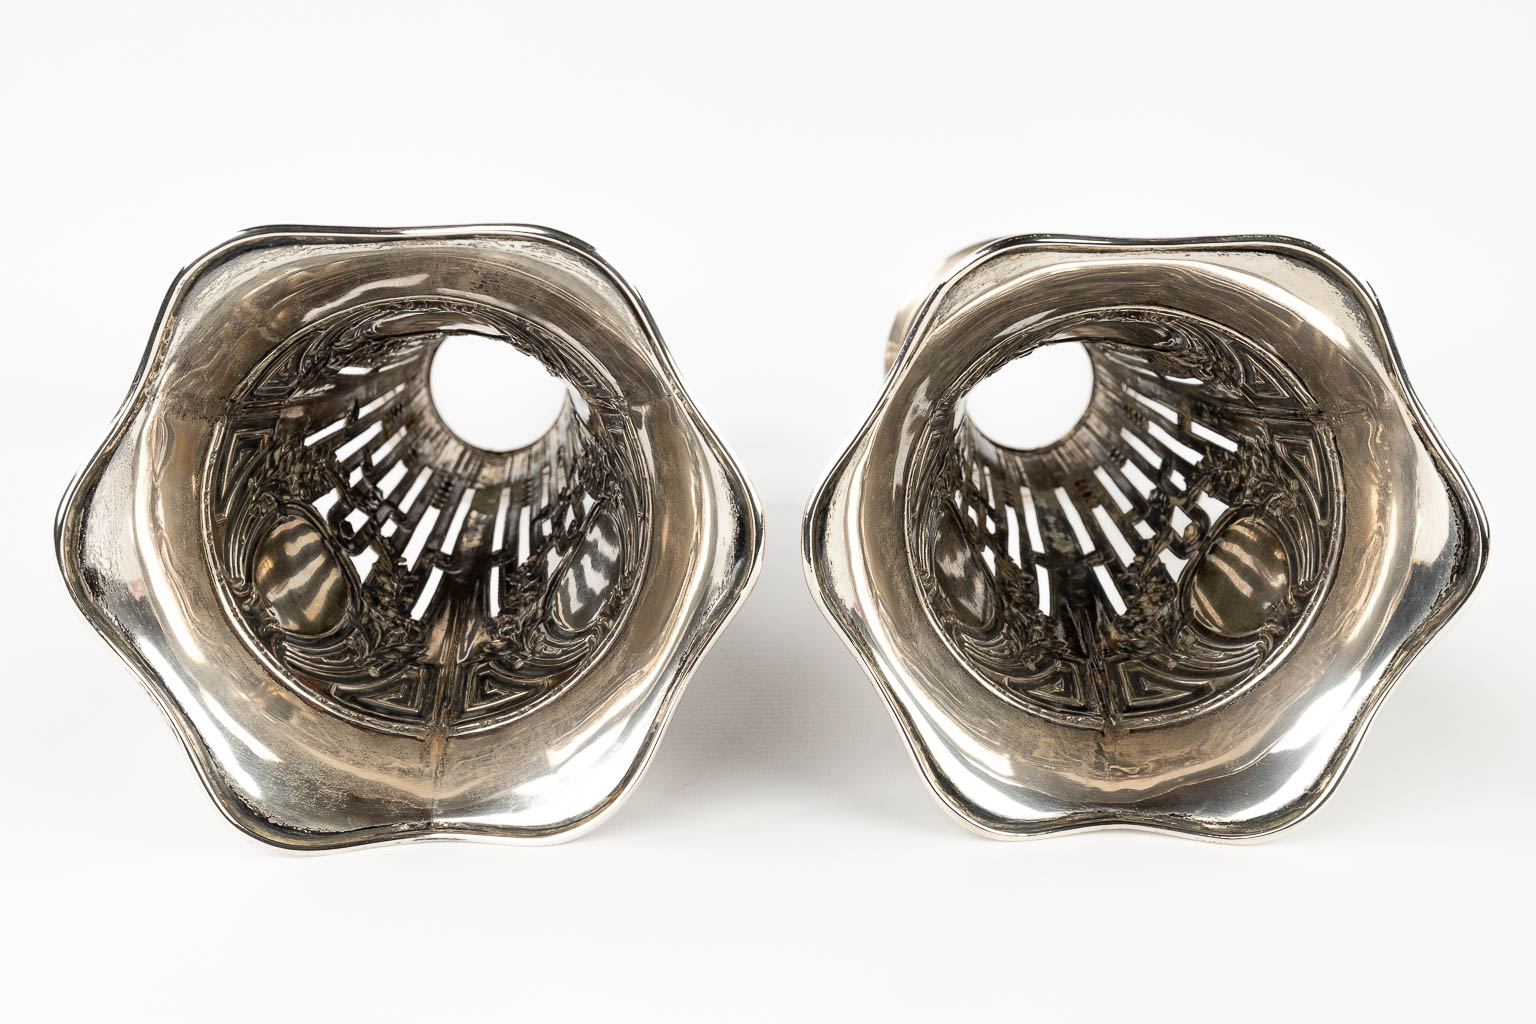 A pair of vases made of silver and marked 800. Made in Germany. 693g. 20th C. (H:31 x D:15,5 cm)